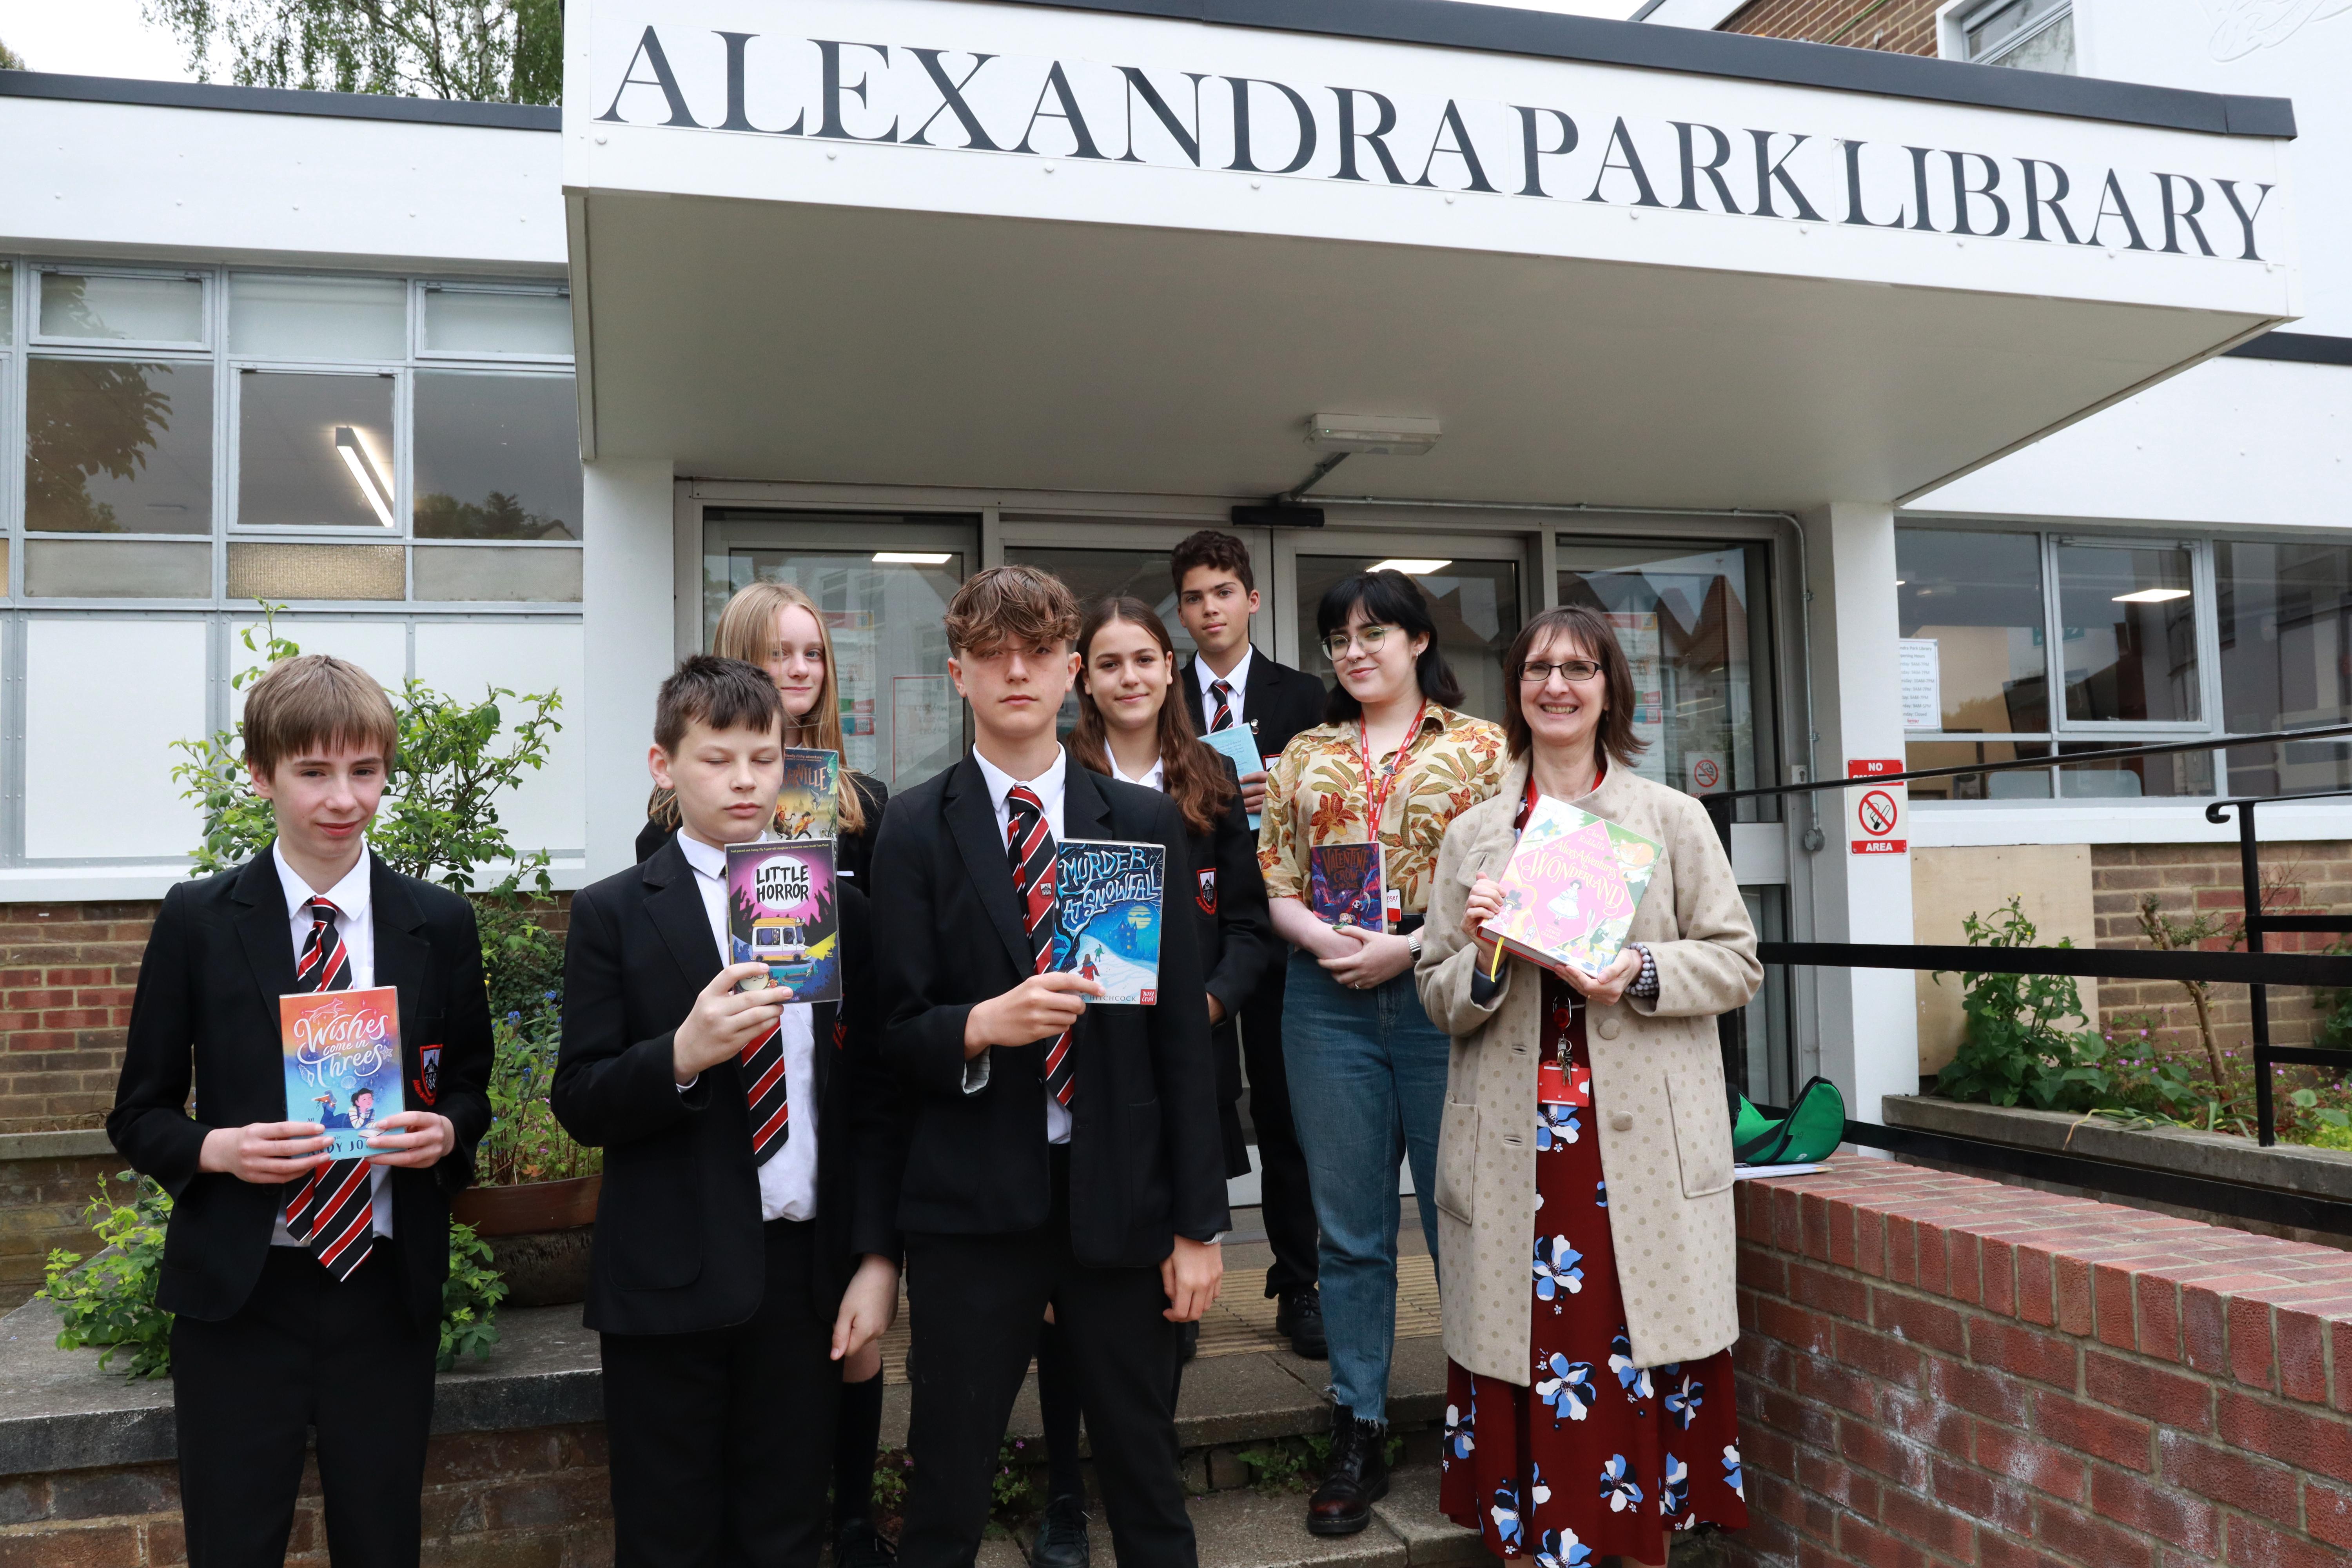 The picture is of six Alexandra Park School (APS) pupils and two Haringey Libraries staff stood outside Alexandra Park Library, with each of them holding up a book from the library.